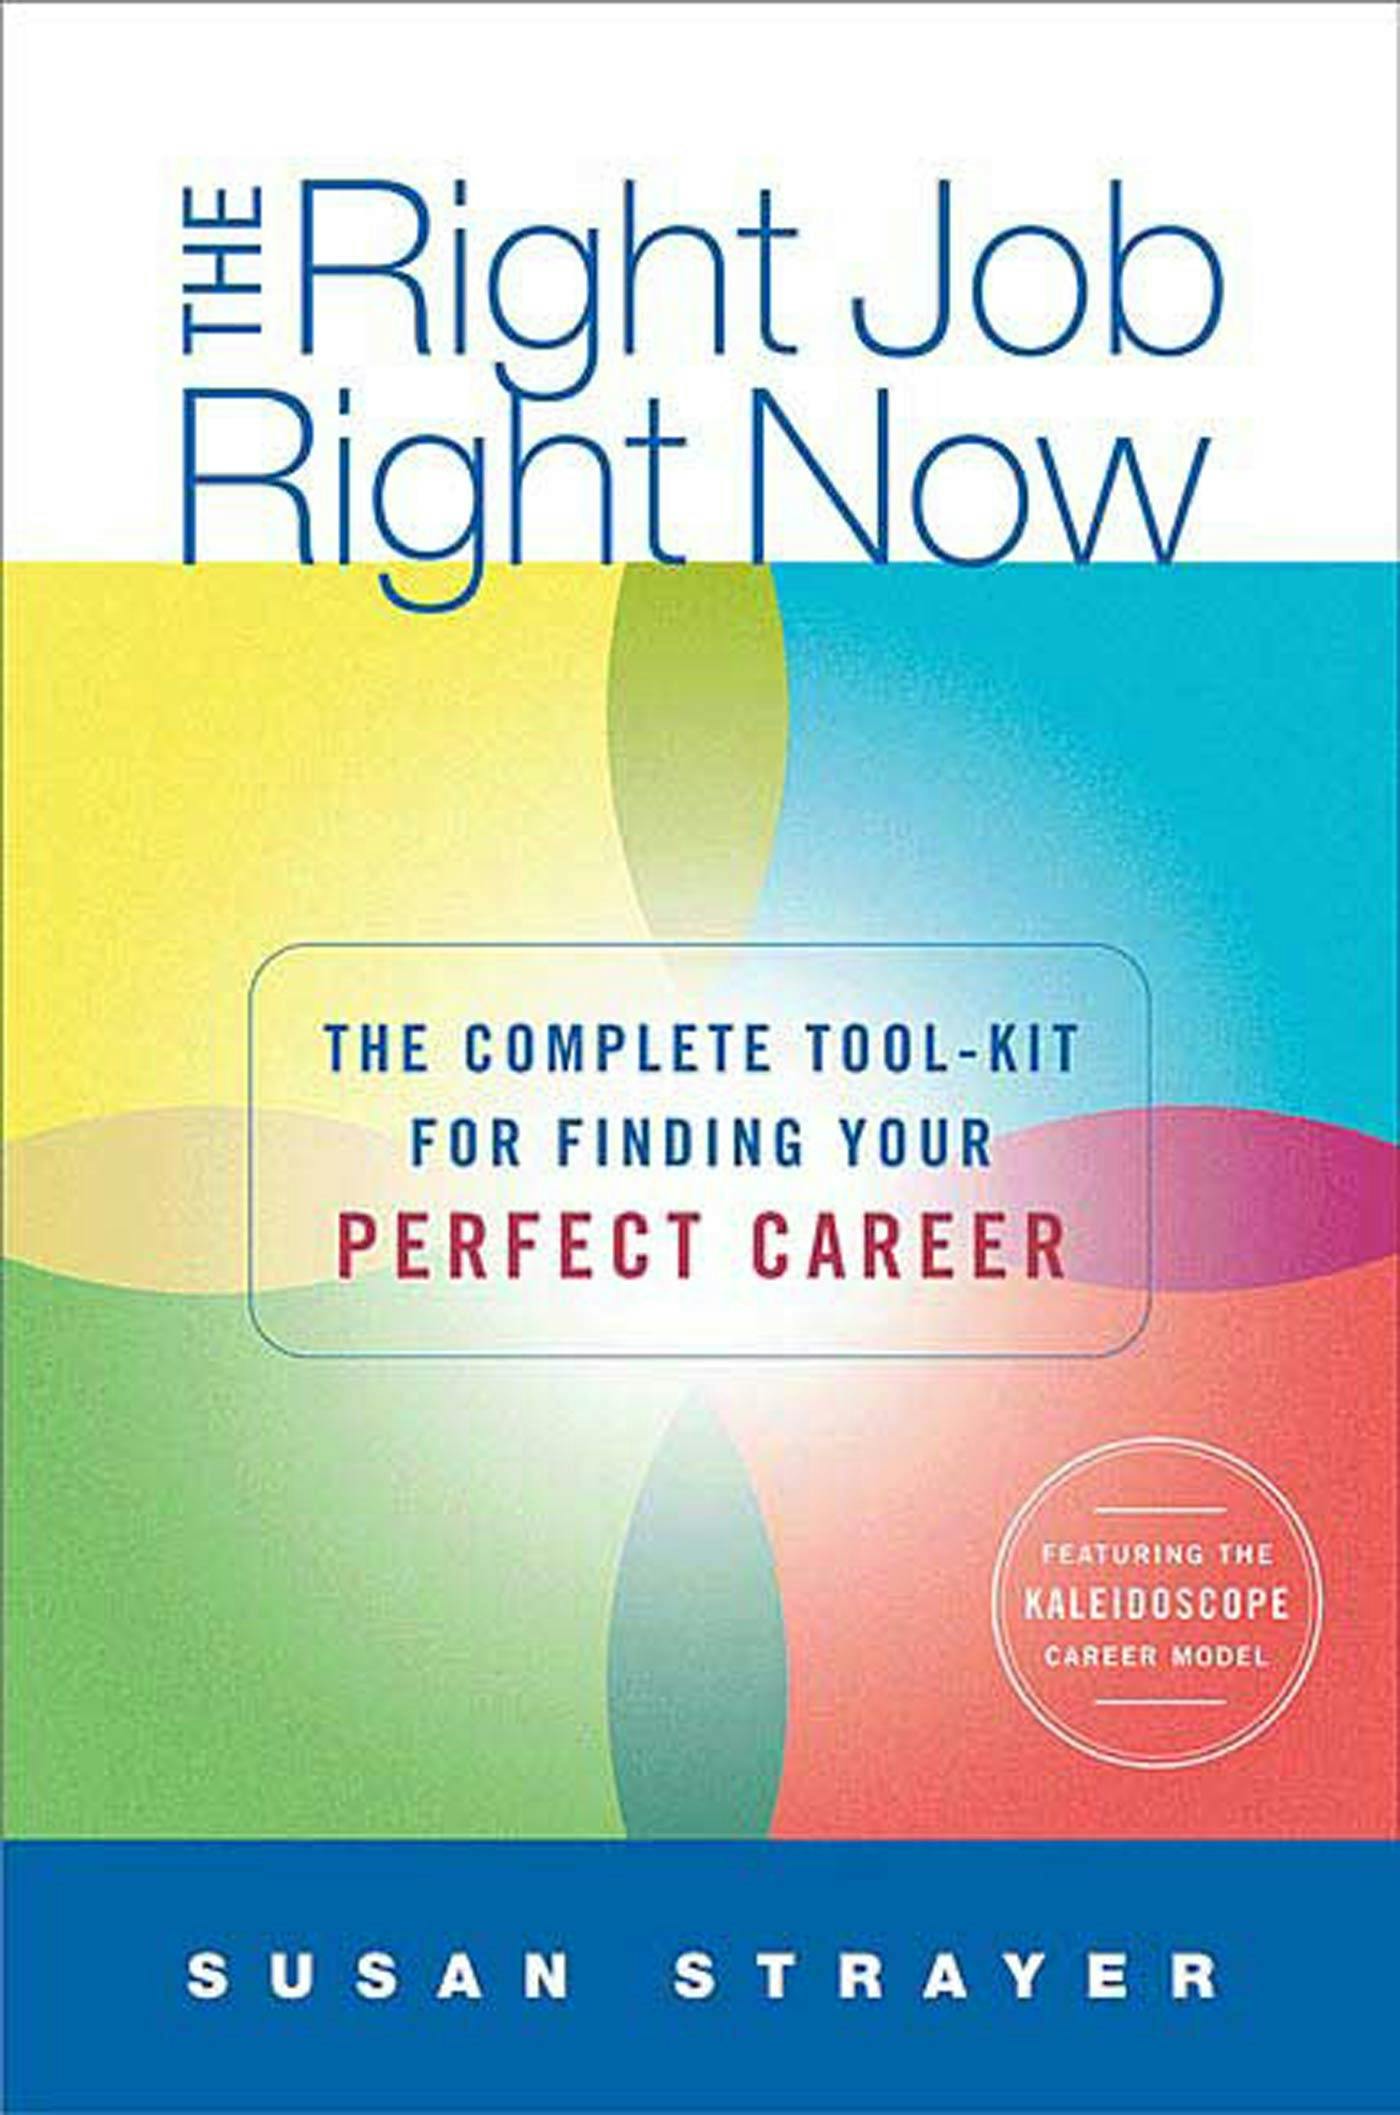 Describes for The Right Job, Right Now by authors